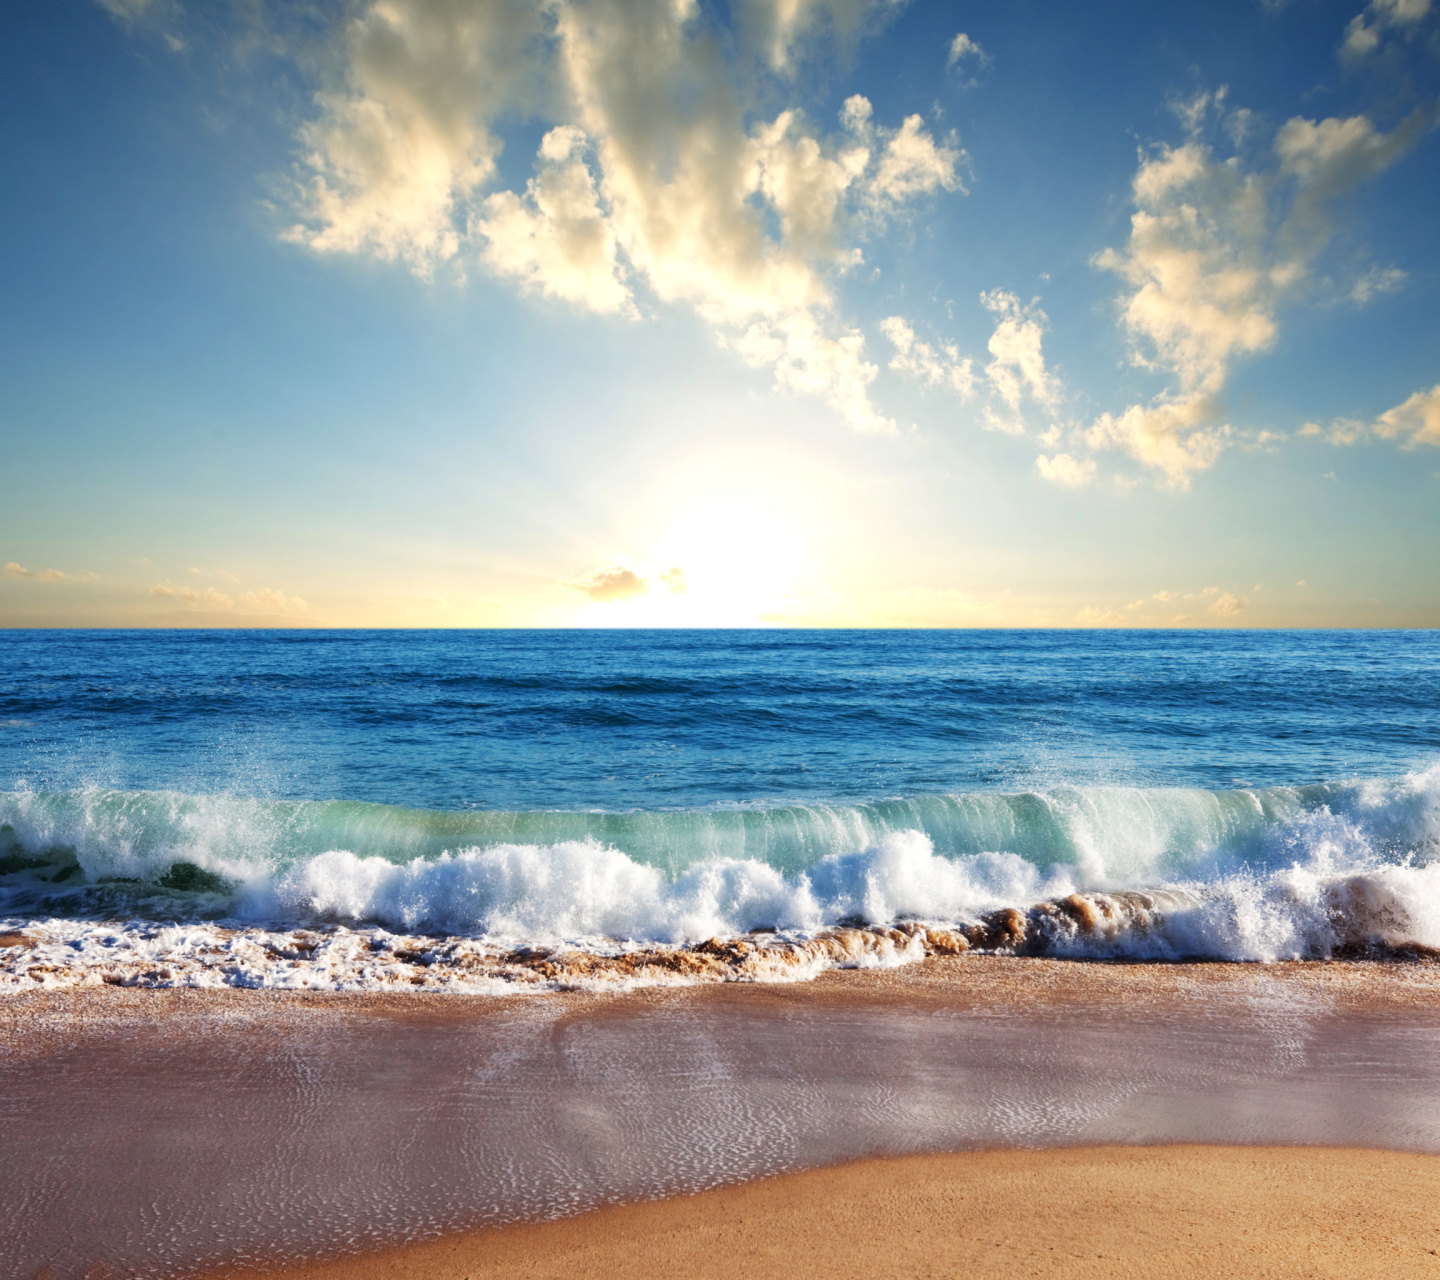 Beach and Waves wallpaper 1440x1280